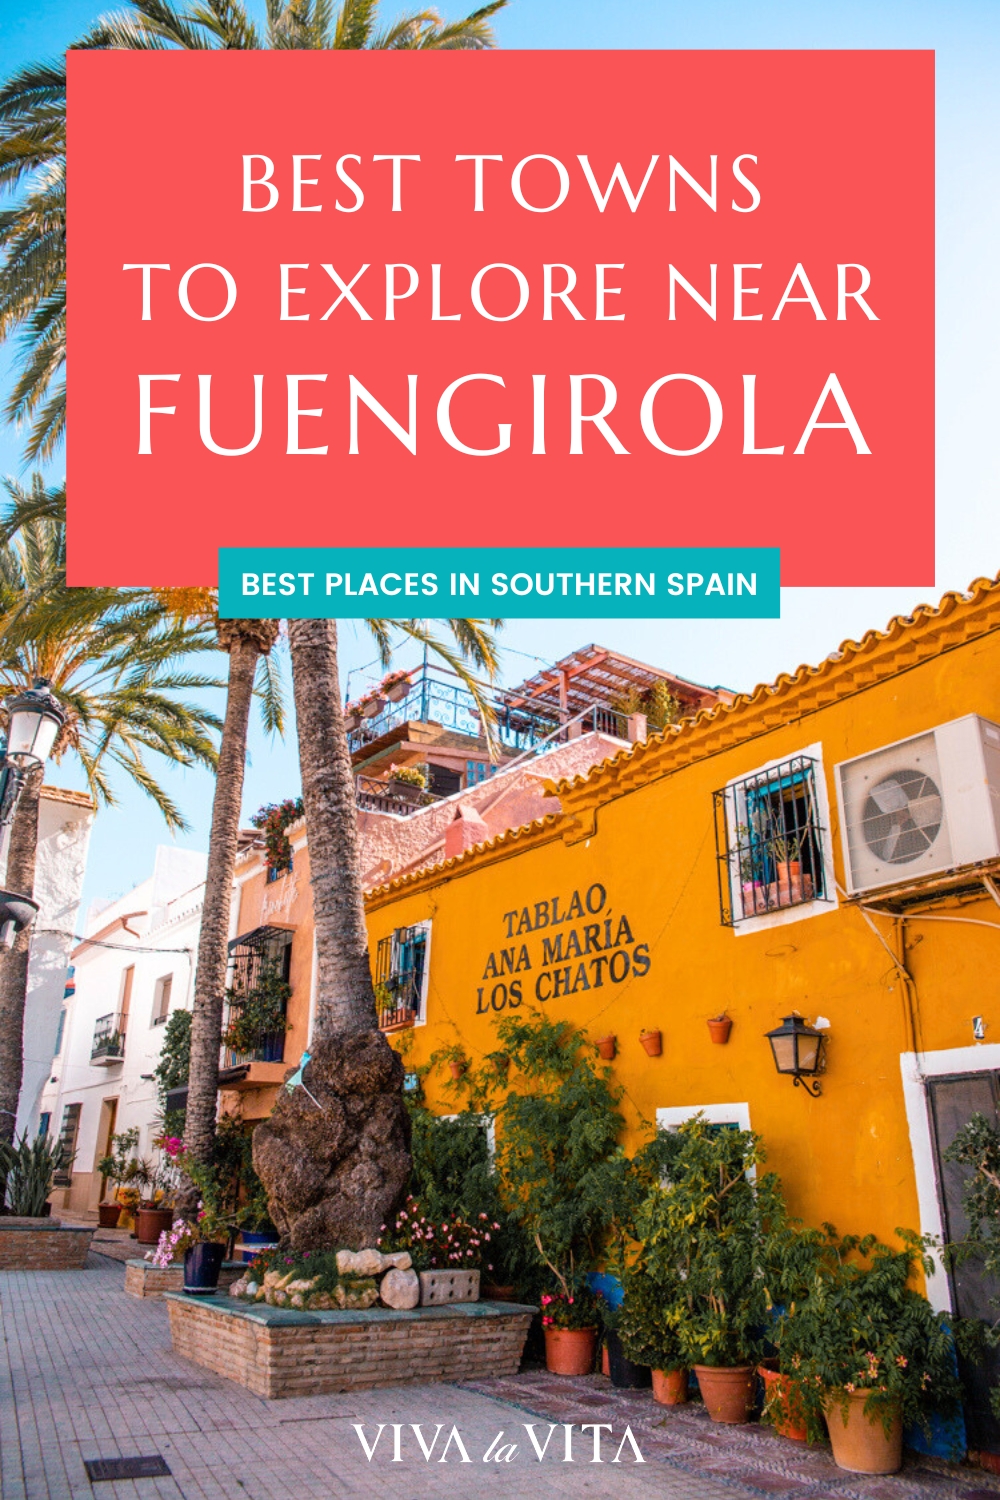 Pinterest image showing the old town of Marbella, with a headline - best towns to explore near Fuengirola, Best places in Southern Spain